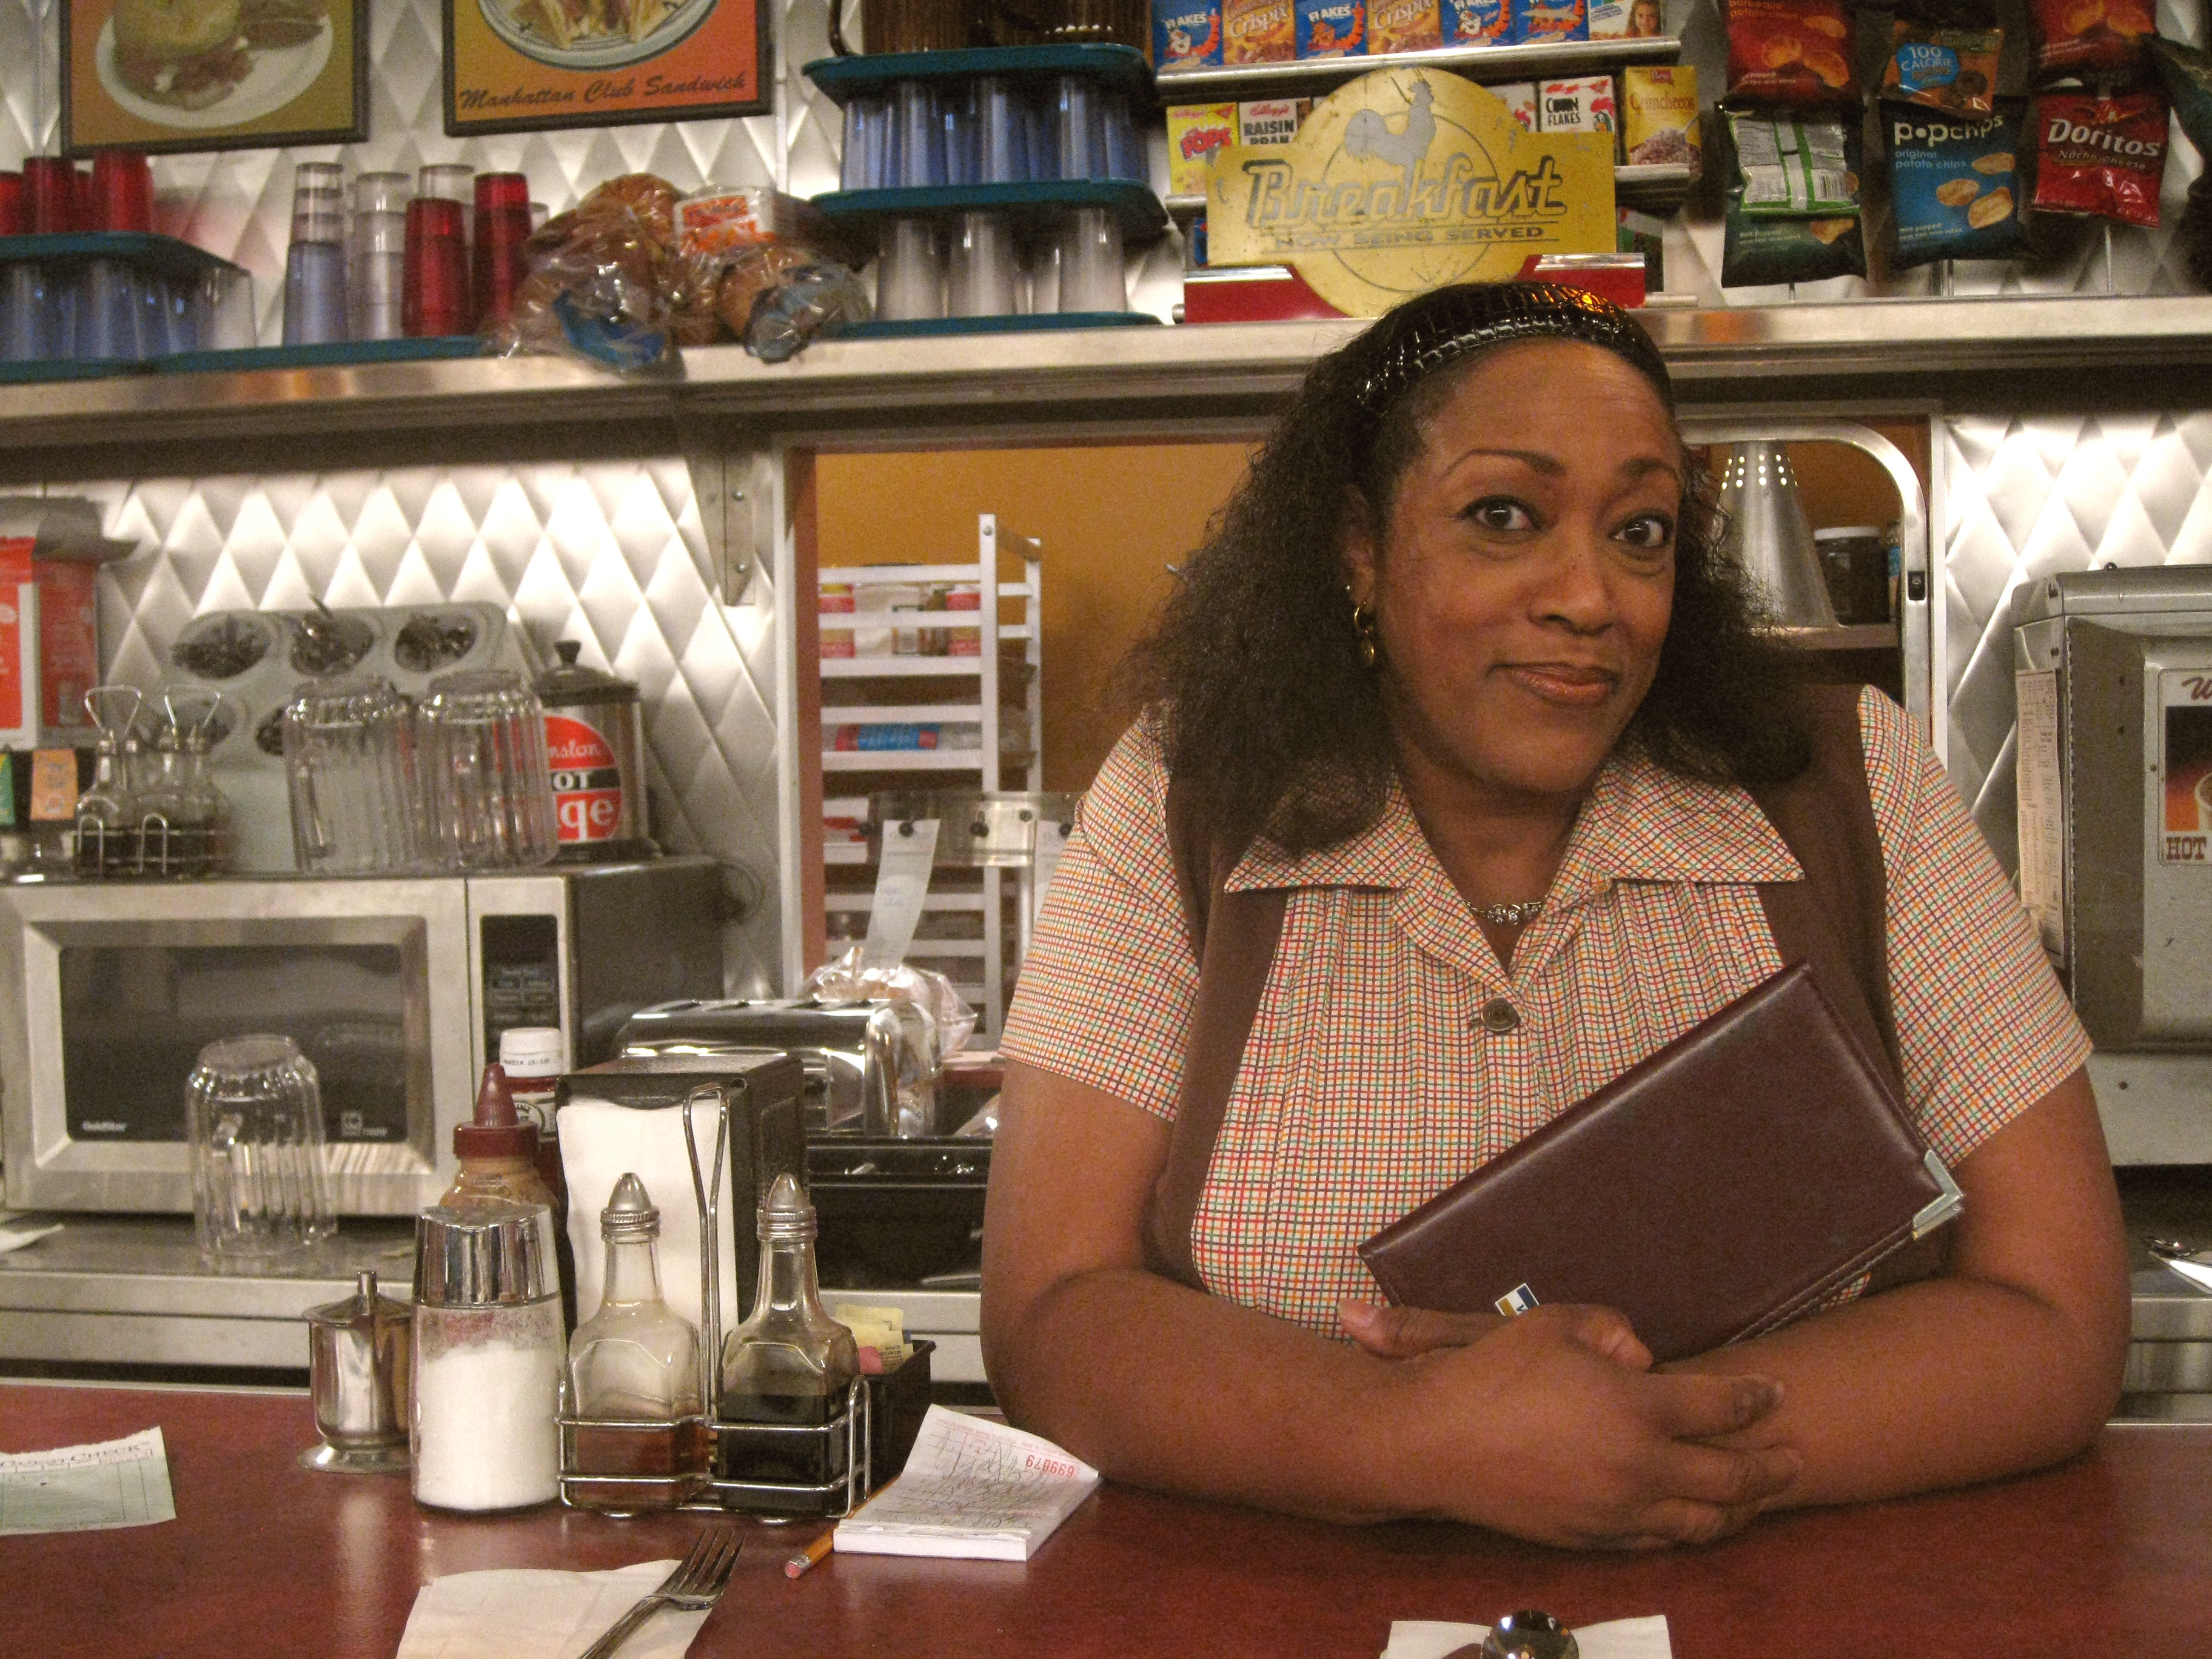 Rules of Engagement's Doreen behind the Island Diner counter